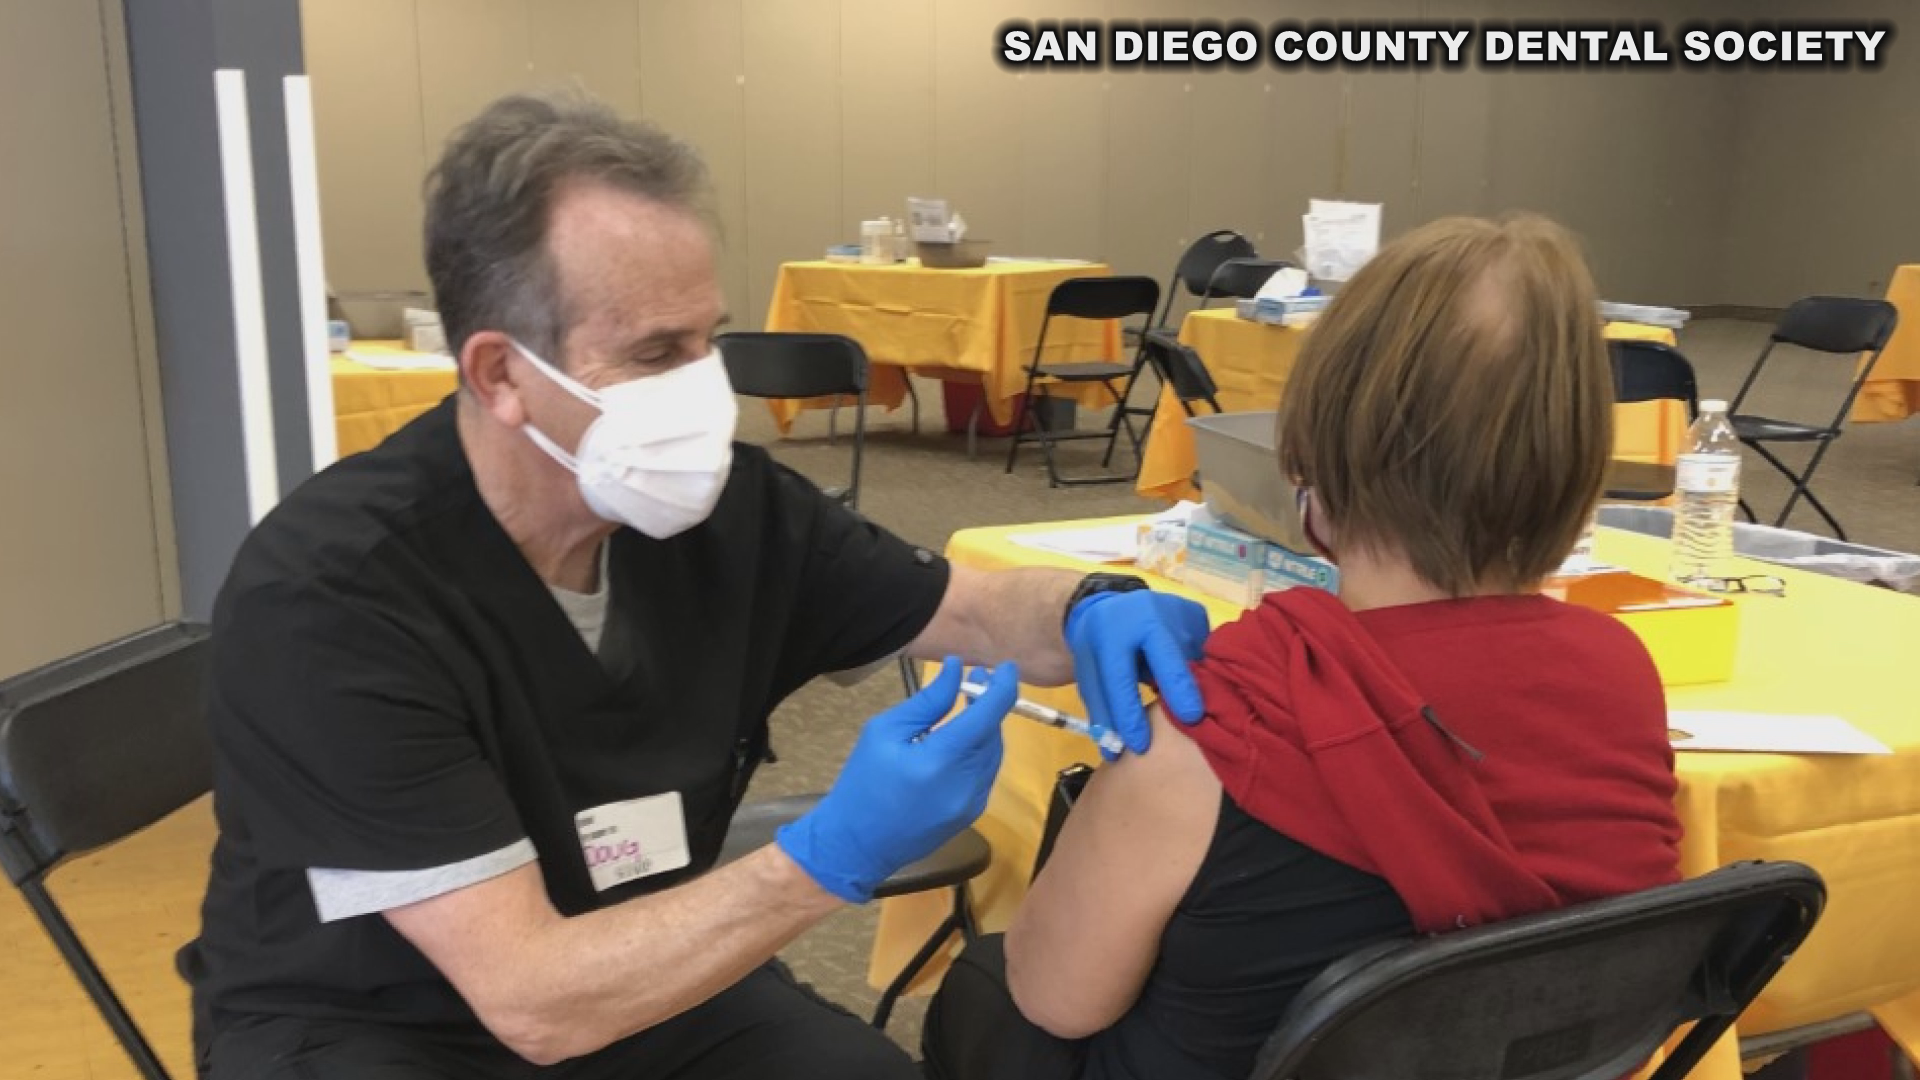 "When Governor Newsom asked the dentist to come out and help with vaccinations, we had over 70 dentists who enrolled in the Reserve Corps," said Dr. Hoa Audette.